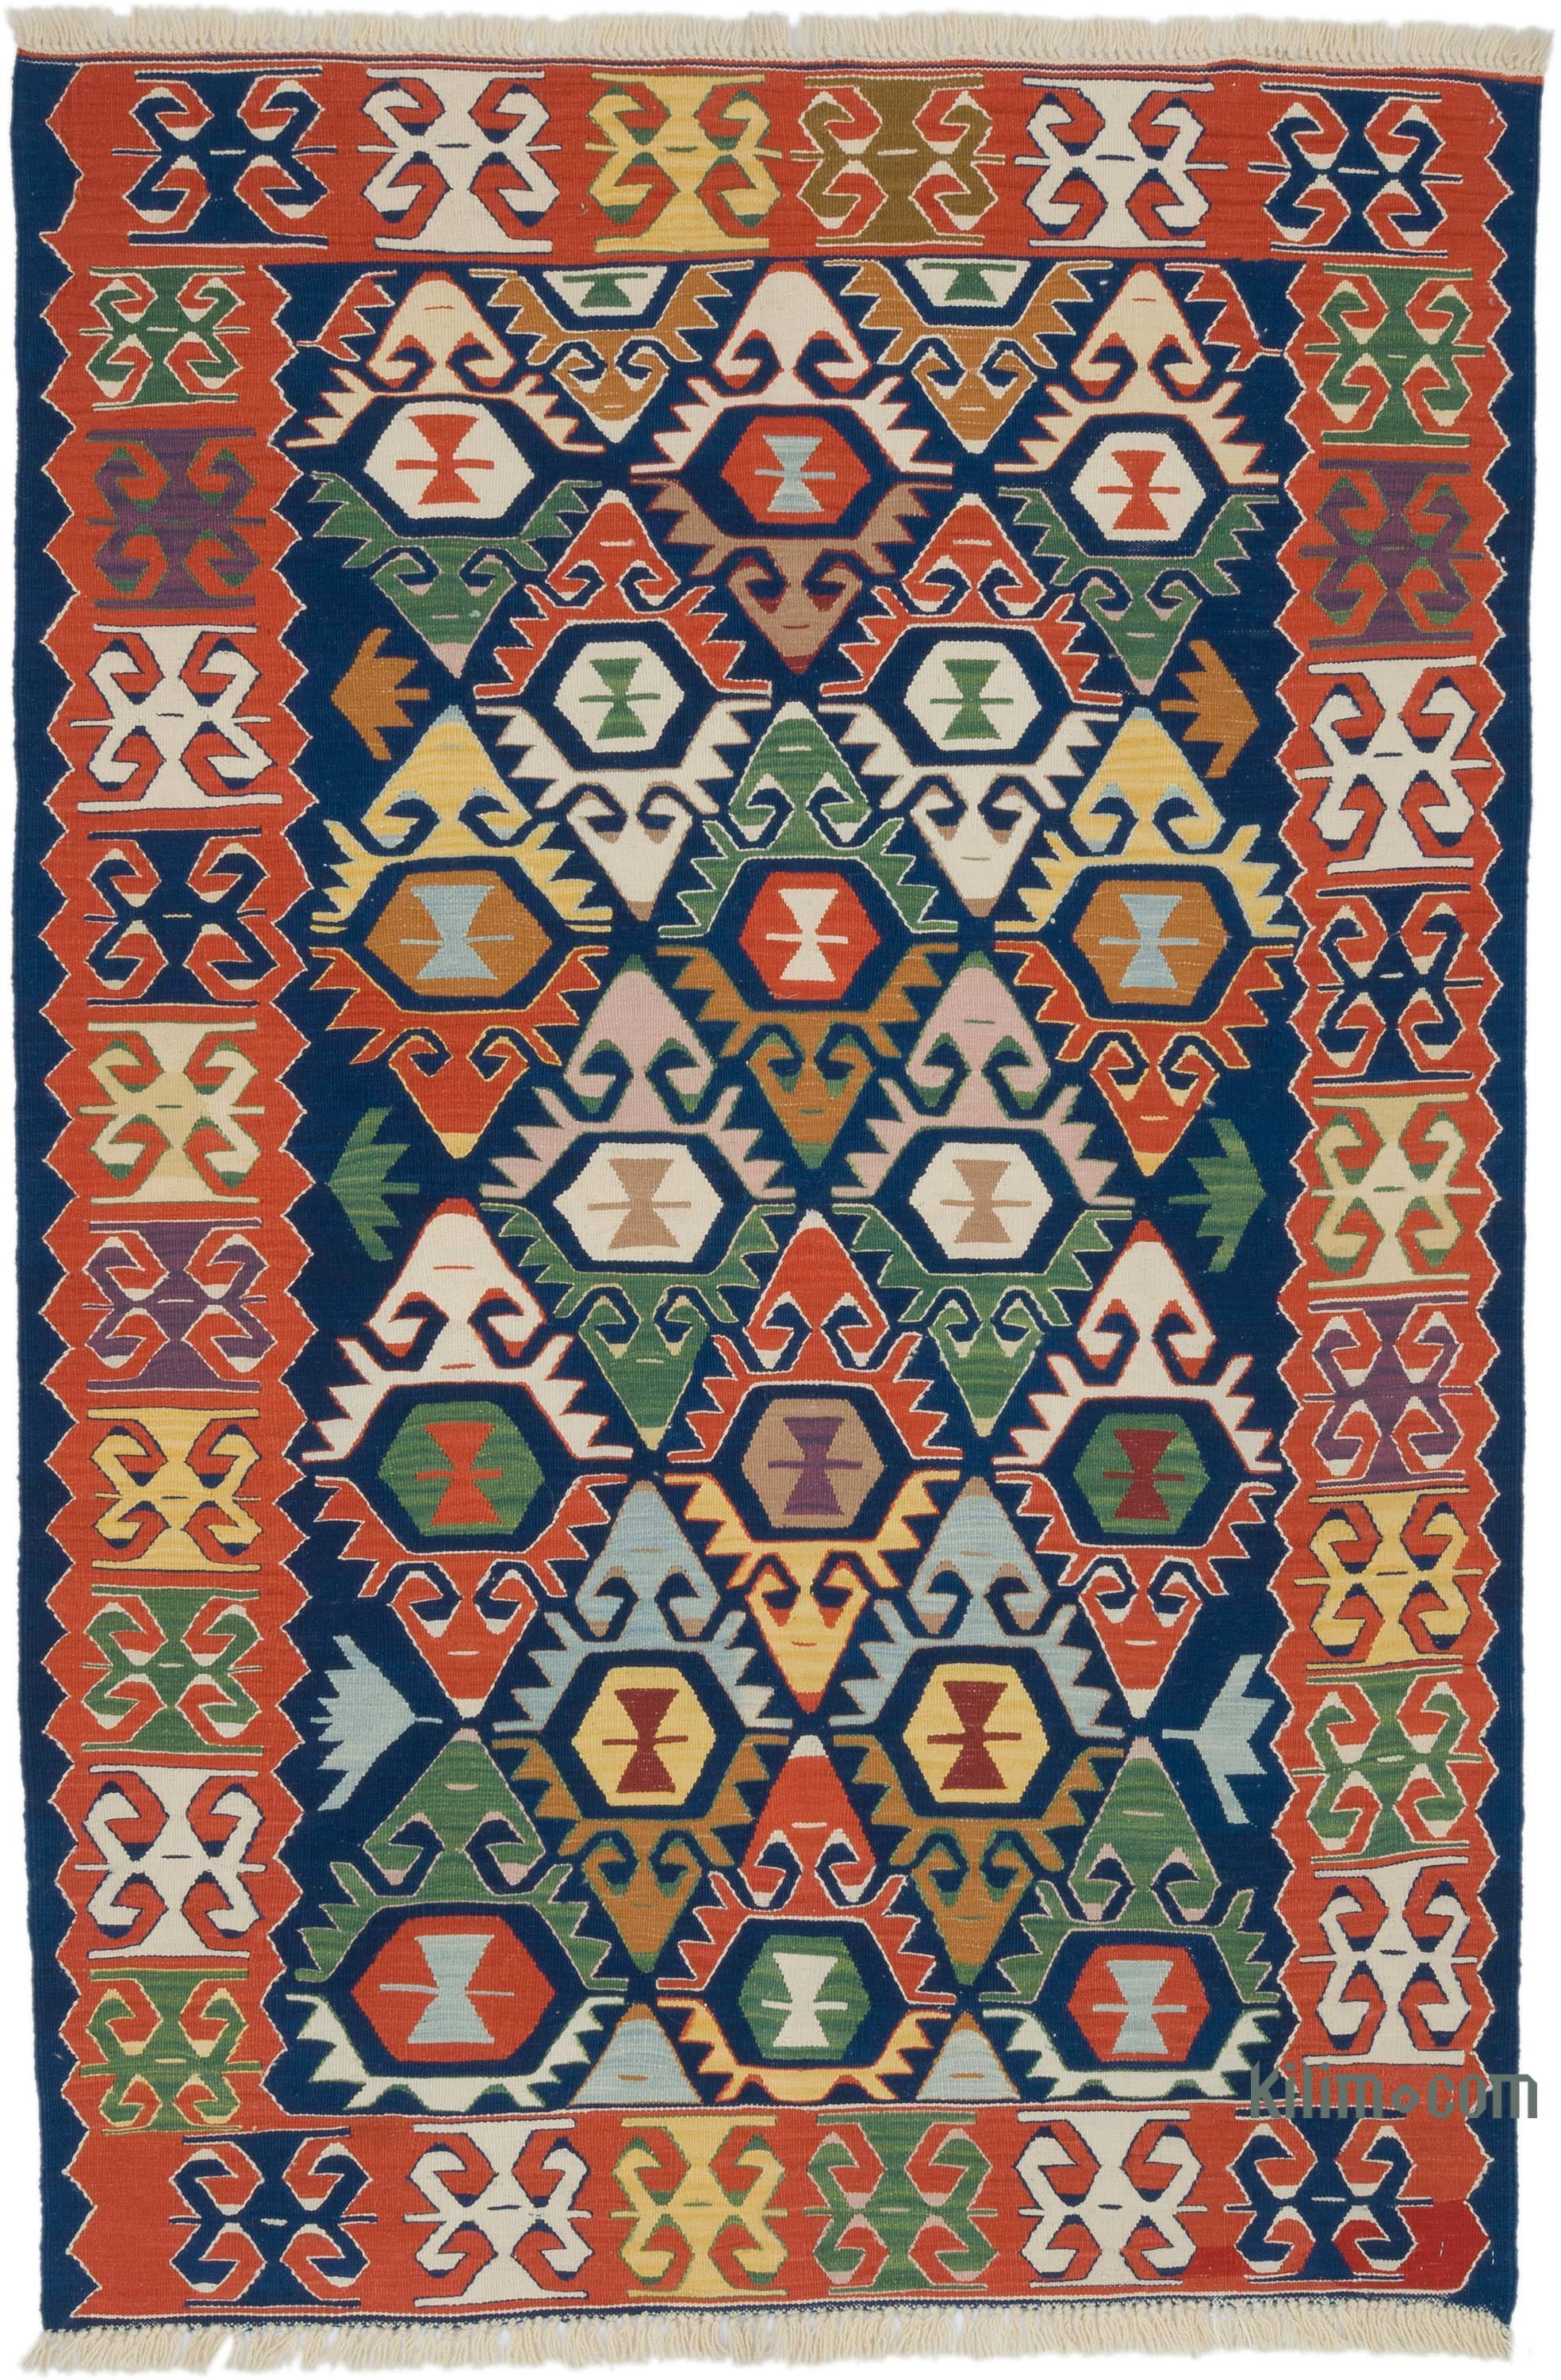 K0059513 New Handwoven Turkish Kilim Rug - 3' x 4' (36 x 48)  The Source  for Vintage Rugs, Tribal Kilim Rugs, Wool Turkish Rugs, Overdyed Persian  Rugs, Runner Rugs, Patchwork Rugs